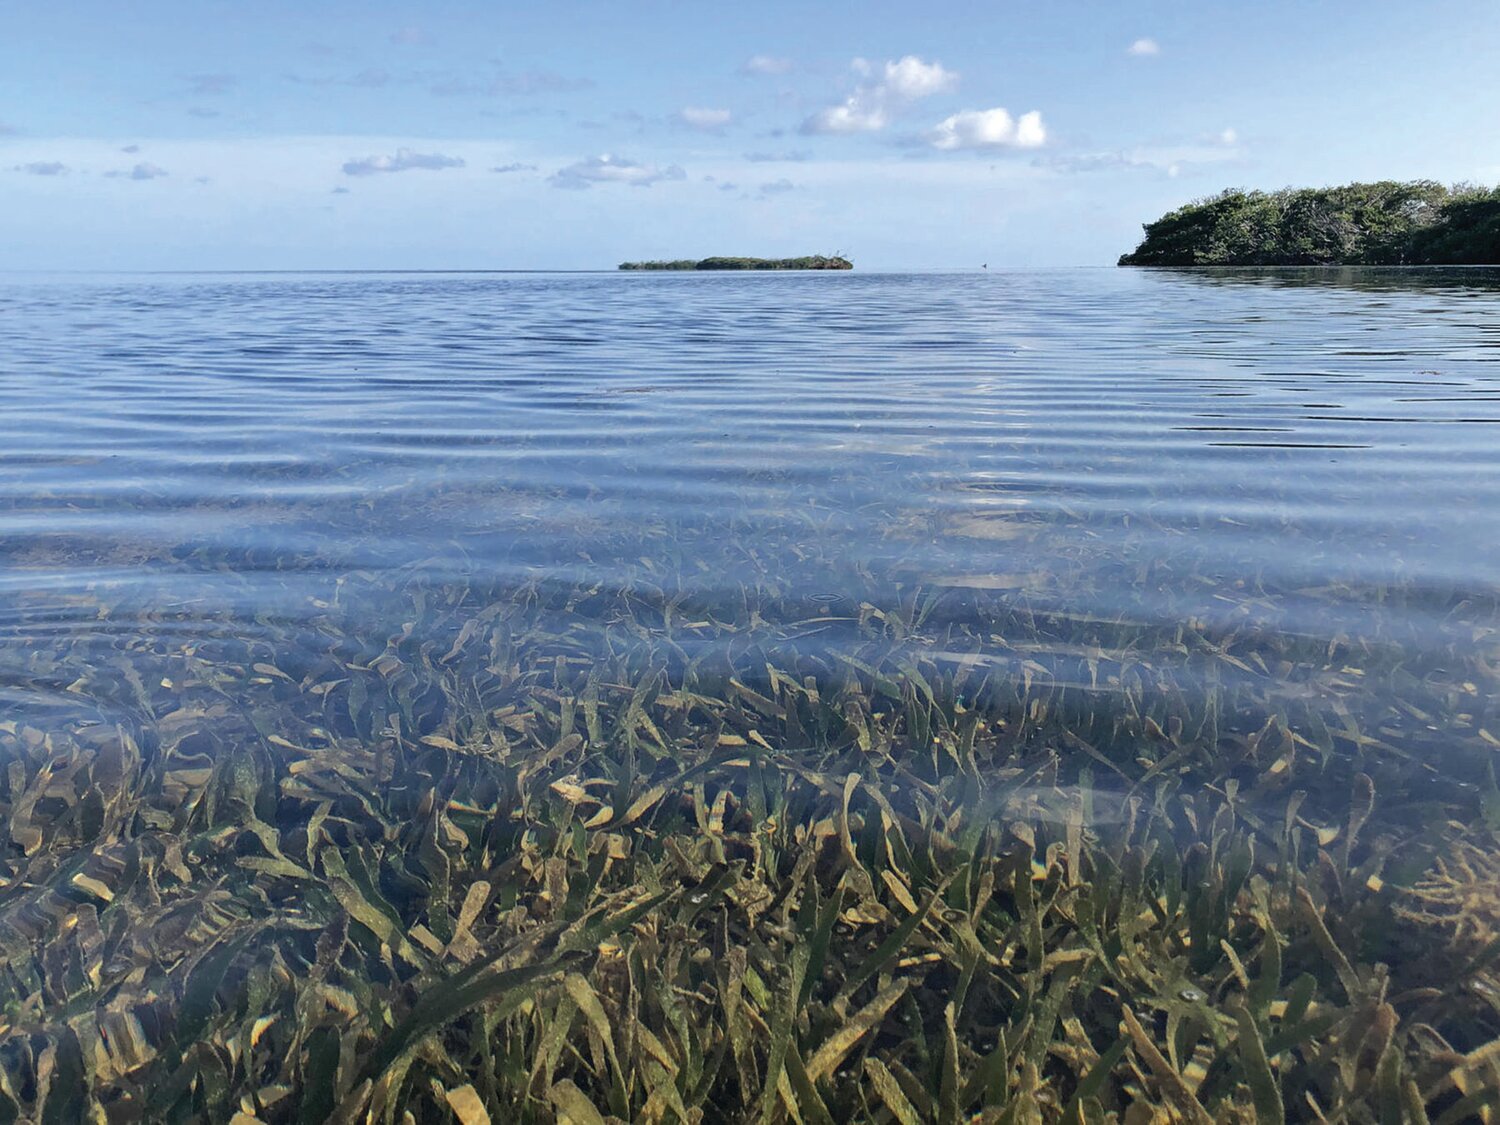 Seagrass in Florida Bay.